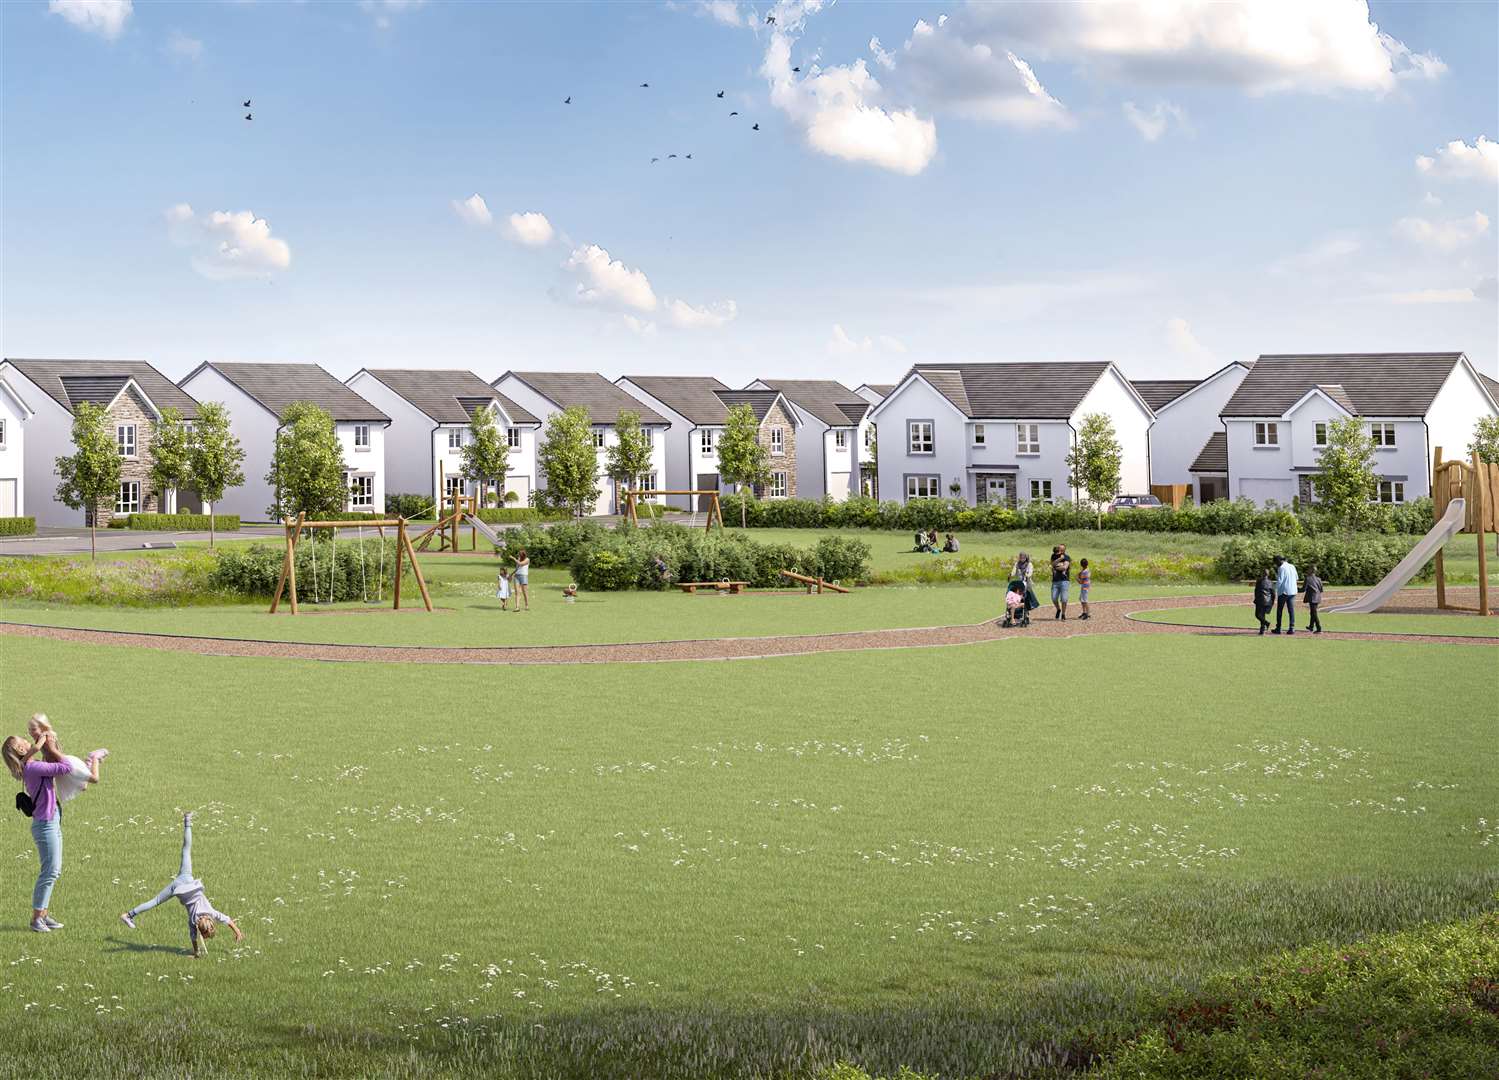 An artist's impression of the new development. Picture: Barratt Homes.